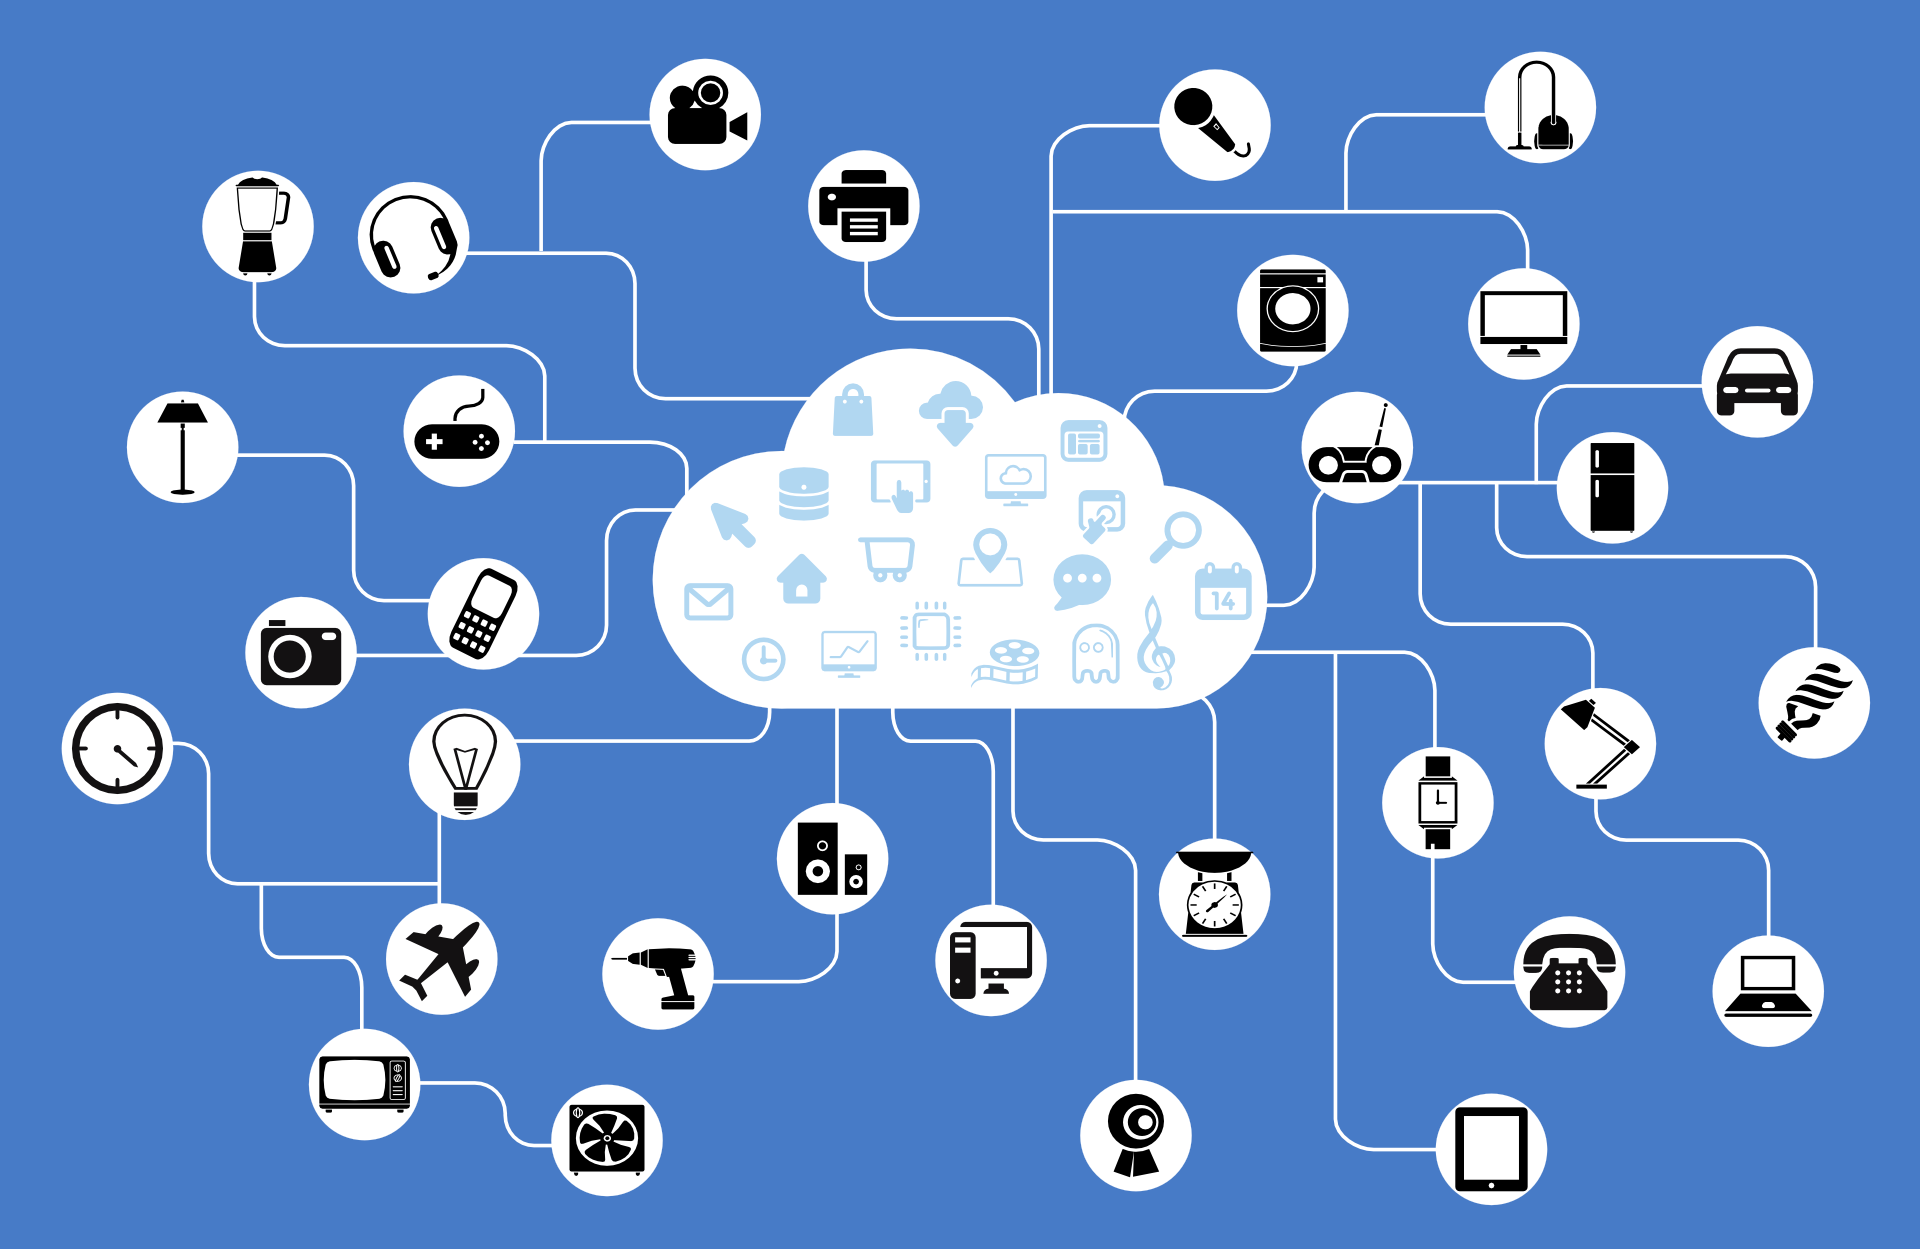 A quick refresher on IoT and its future